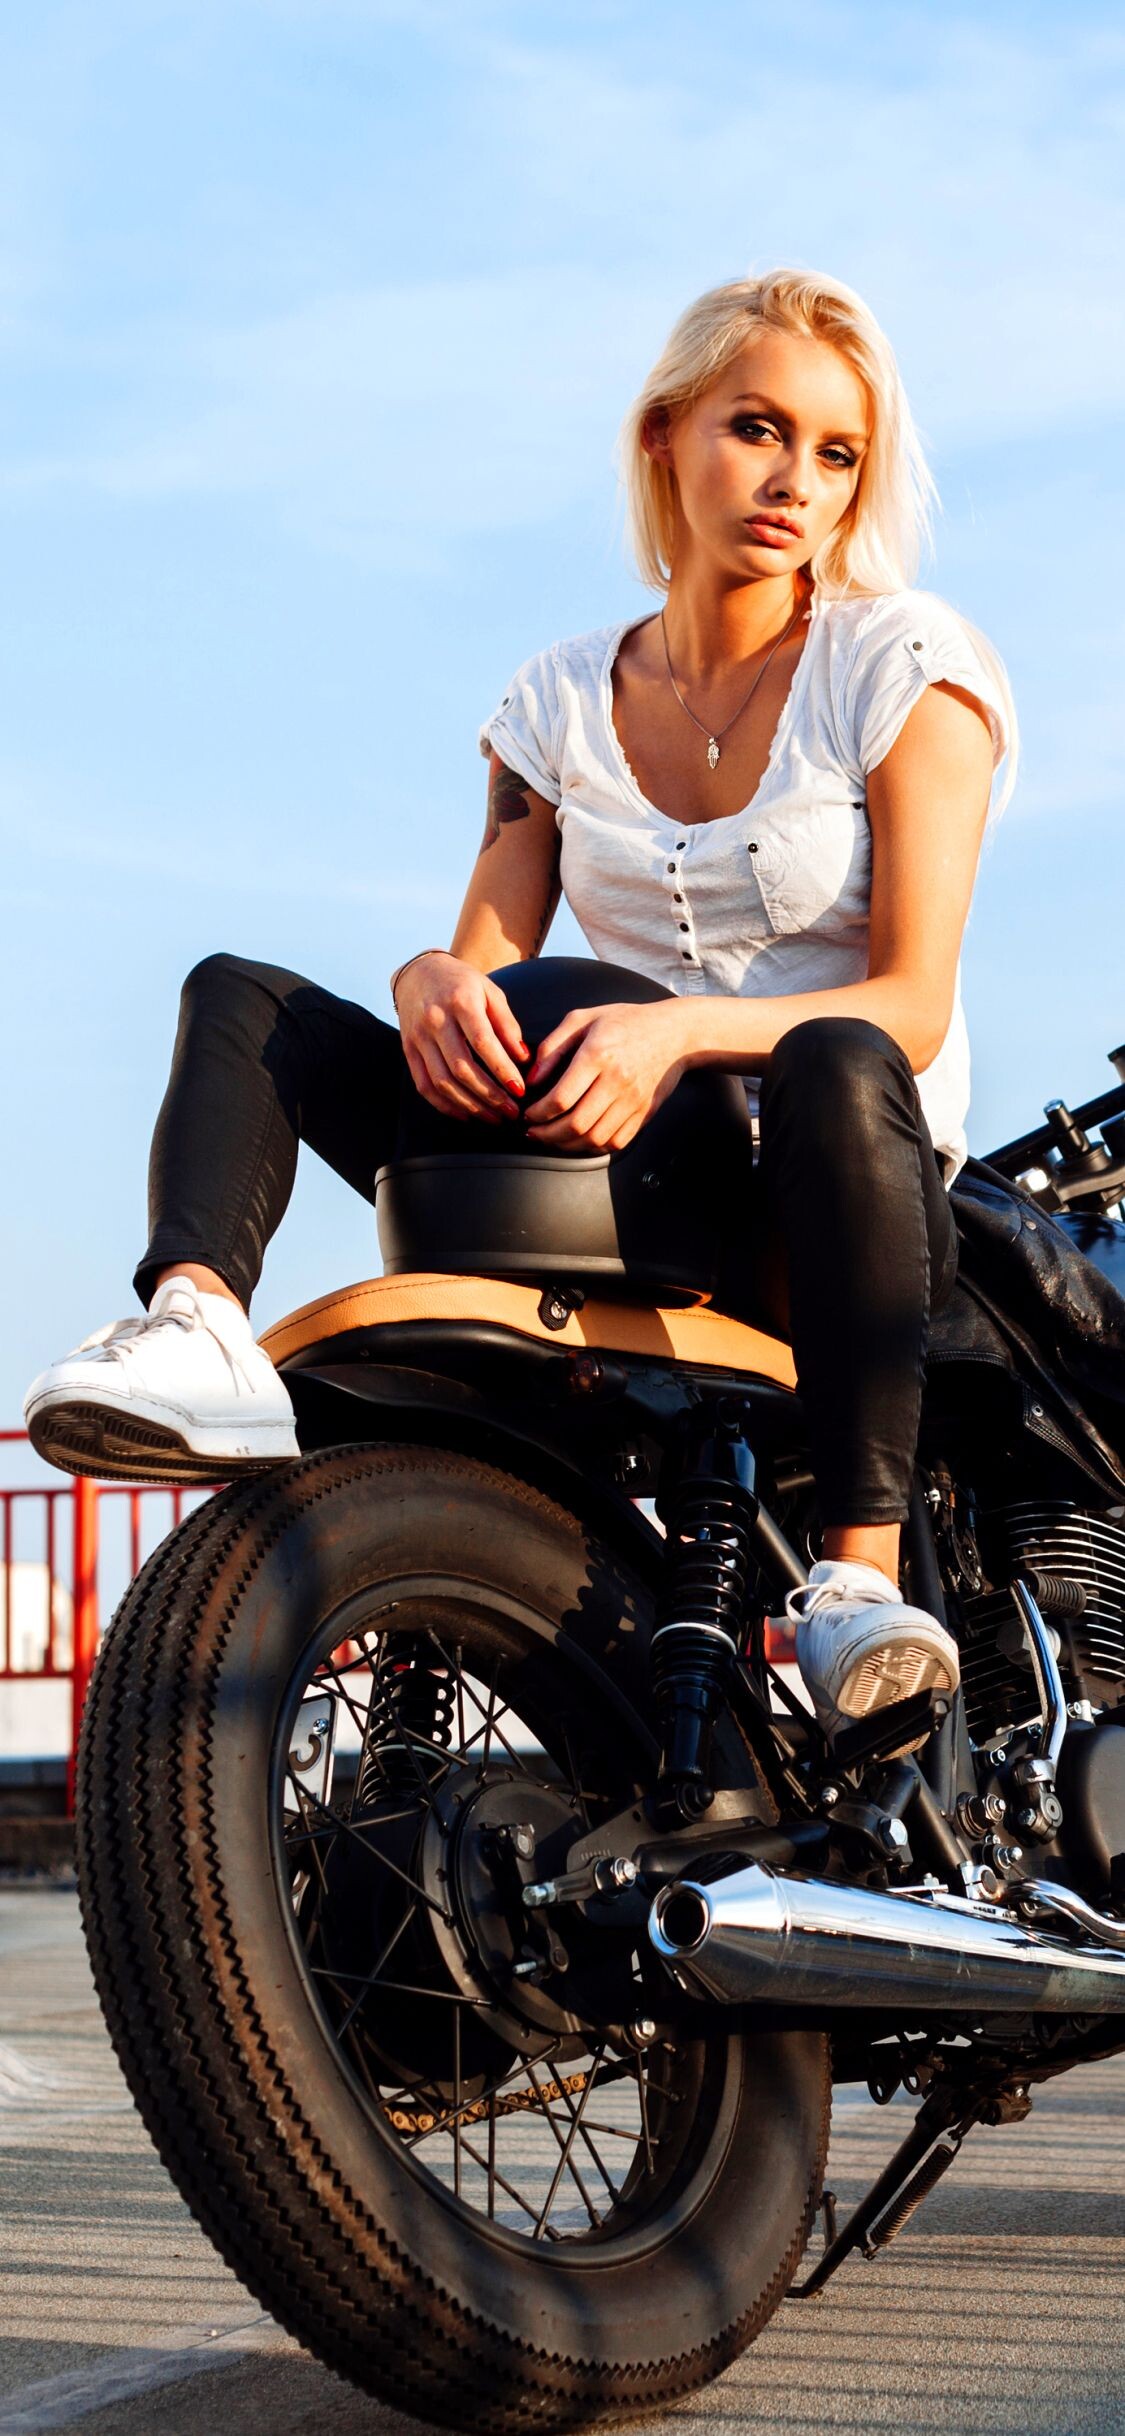 Girls and Motorcycles: Exhaust pipe, A full face helmet, A race bike, Female motorcyclist. 1130x2440 HD Background.